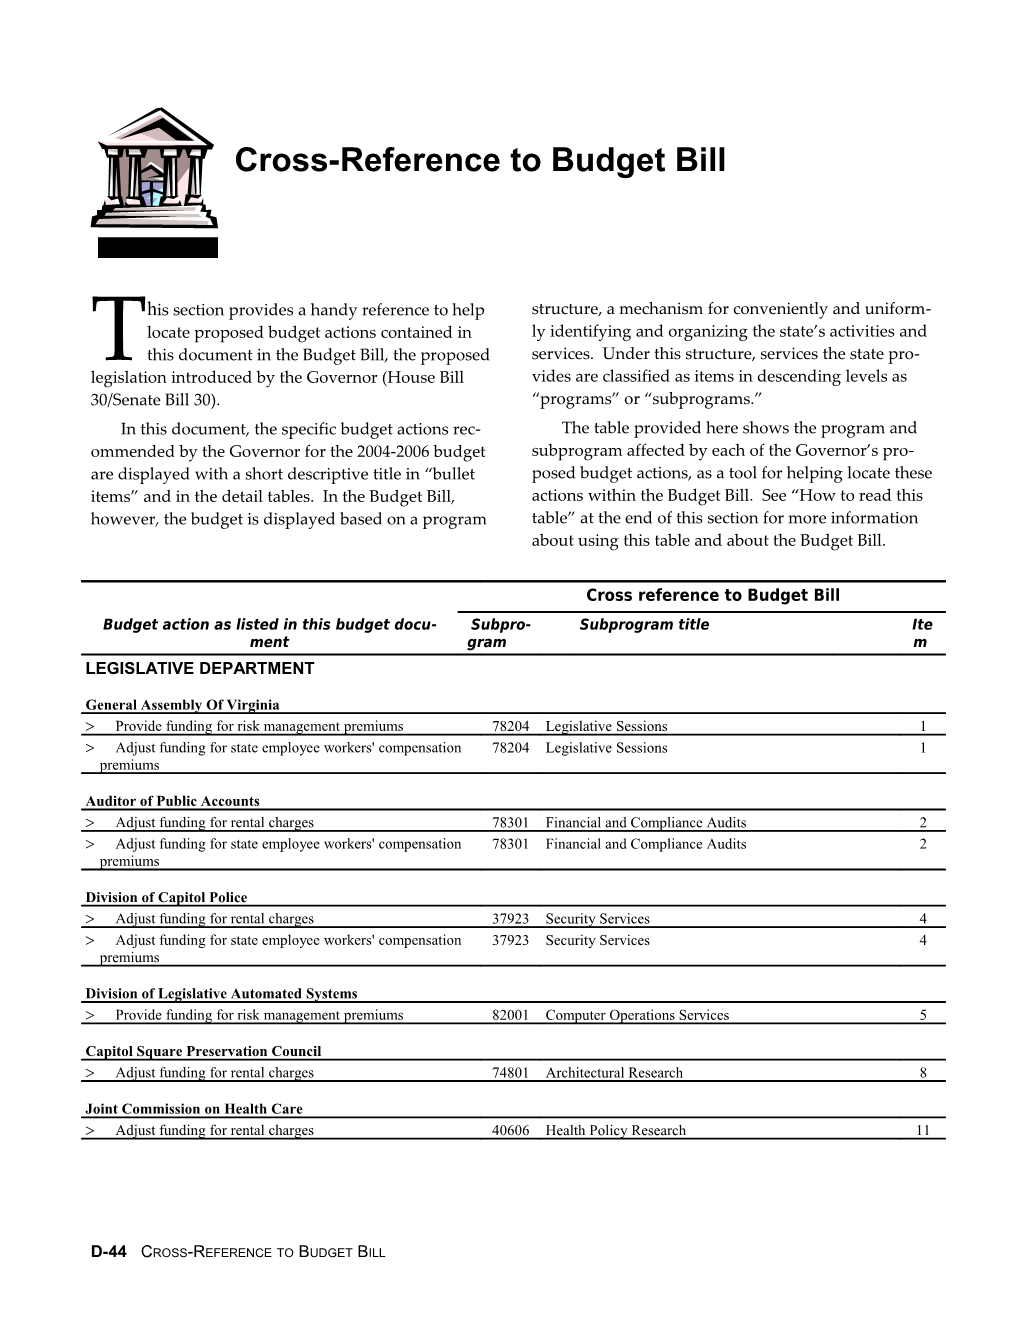 This Publication Describes the Governor'sproposed 1996-98 Biennial Budget for the Commonwealth